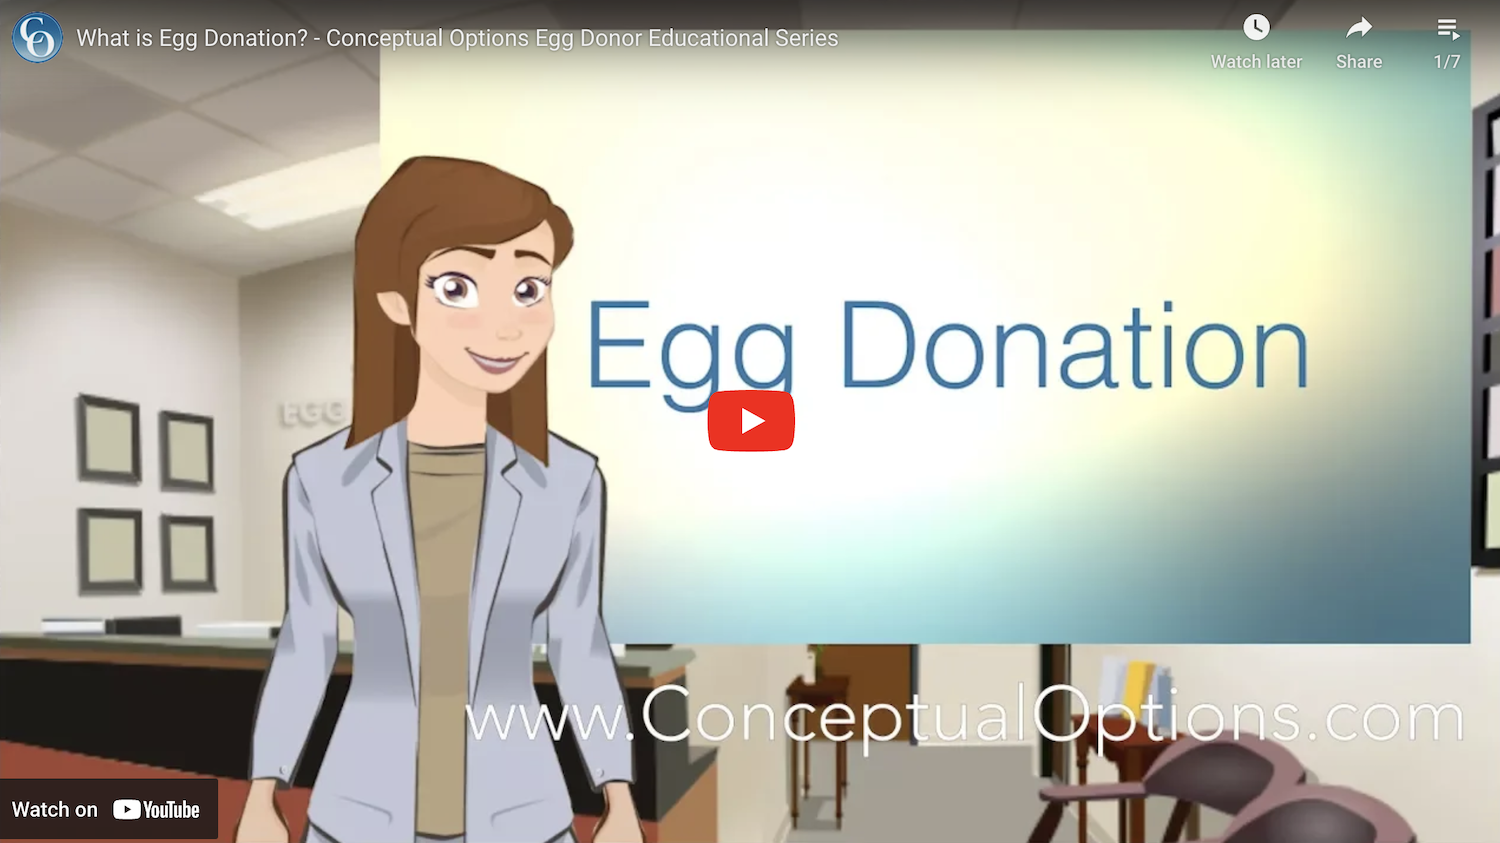 What is Egg Donation video